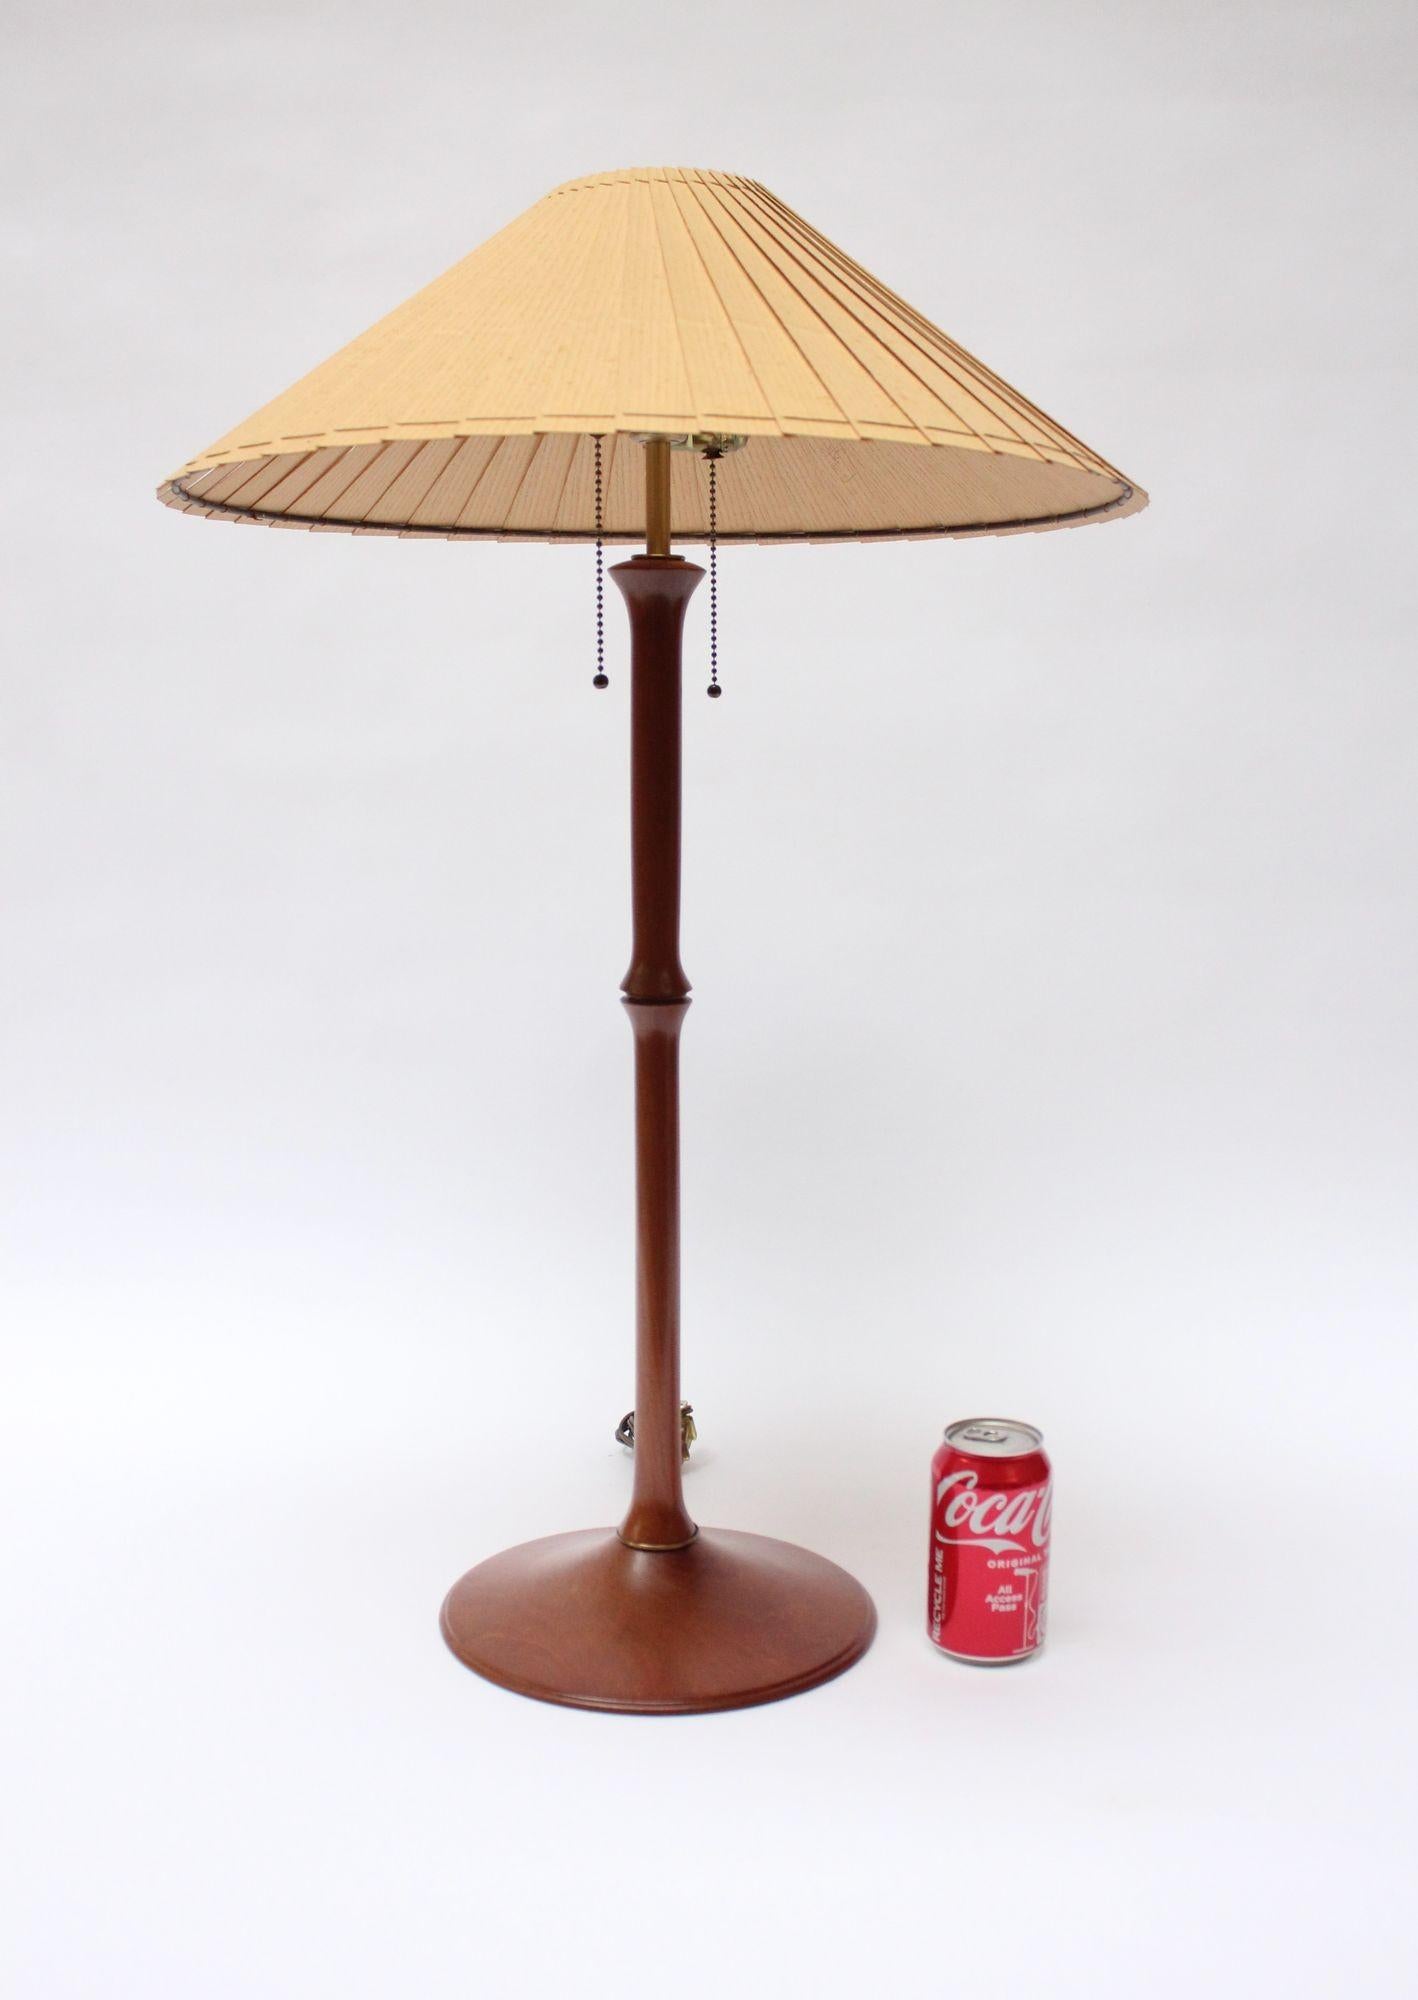 American Studio Craft Sculptural Cherry Wood and Brass Table Lamp with Original Shade For Sale